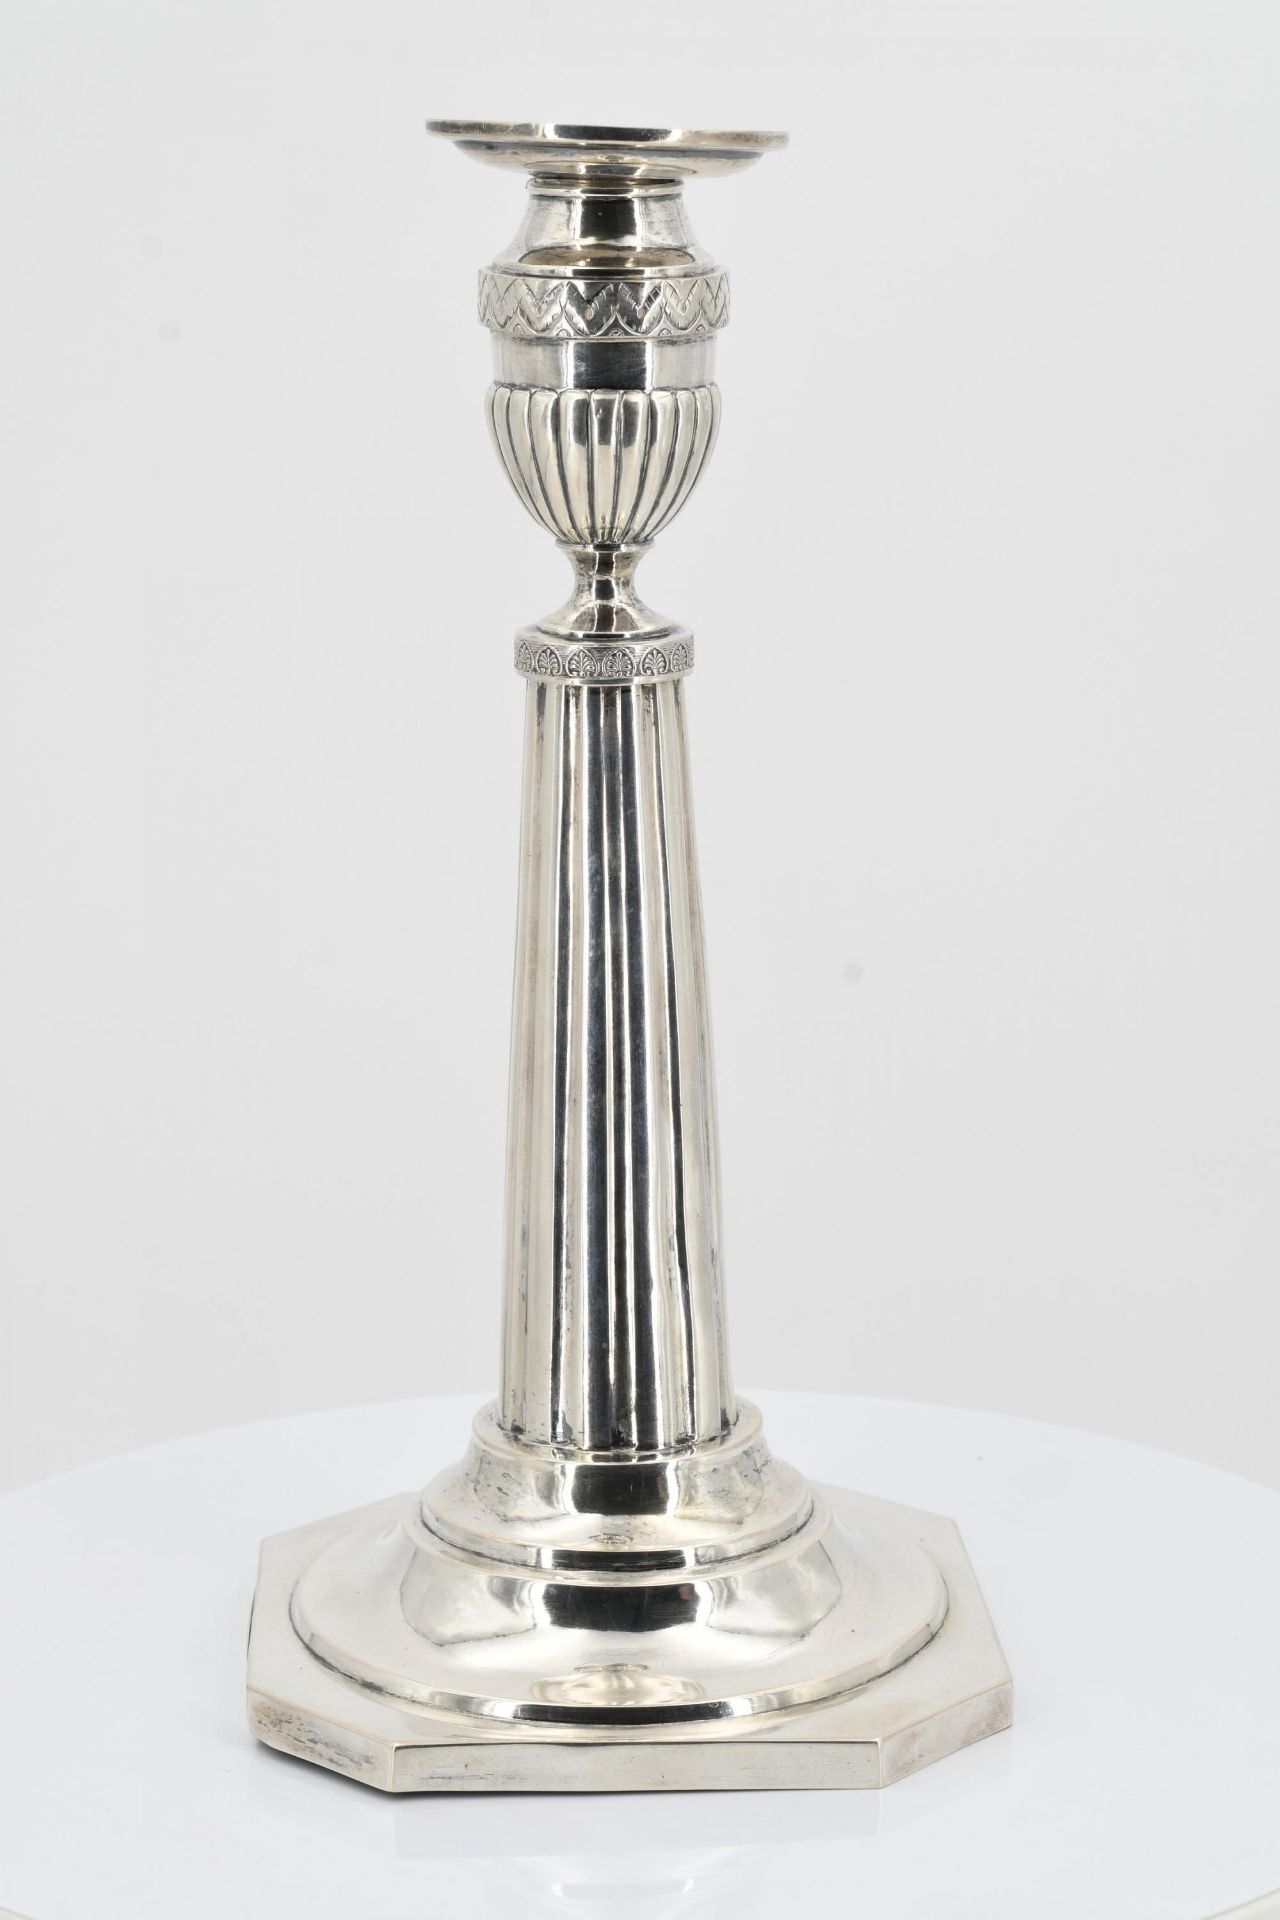 Pair of large candlesticks with fluted shafts - Image 4 of 12